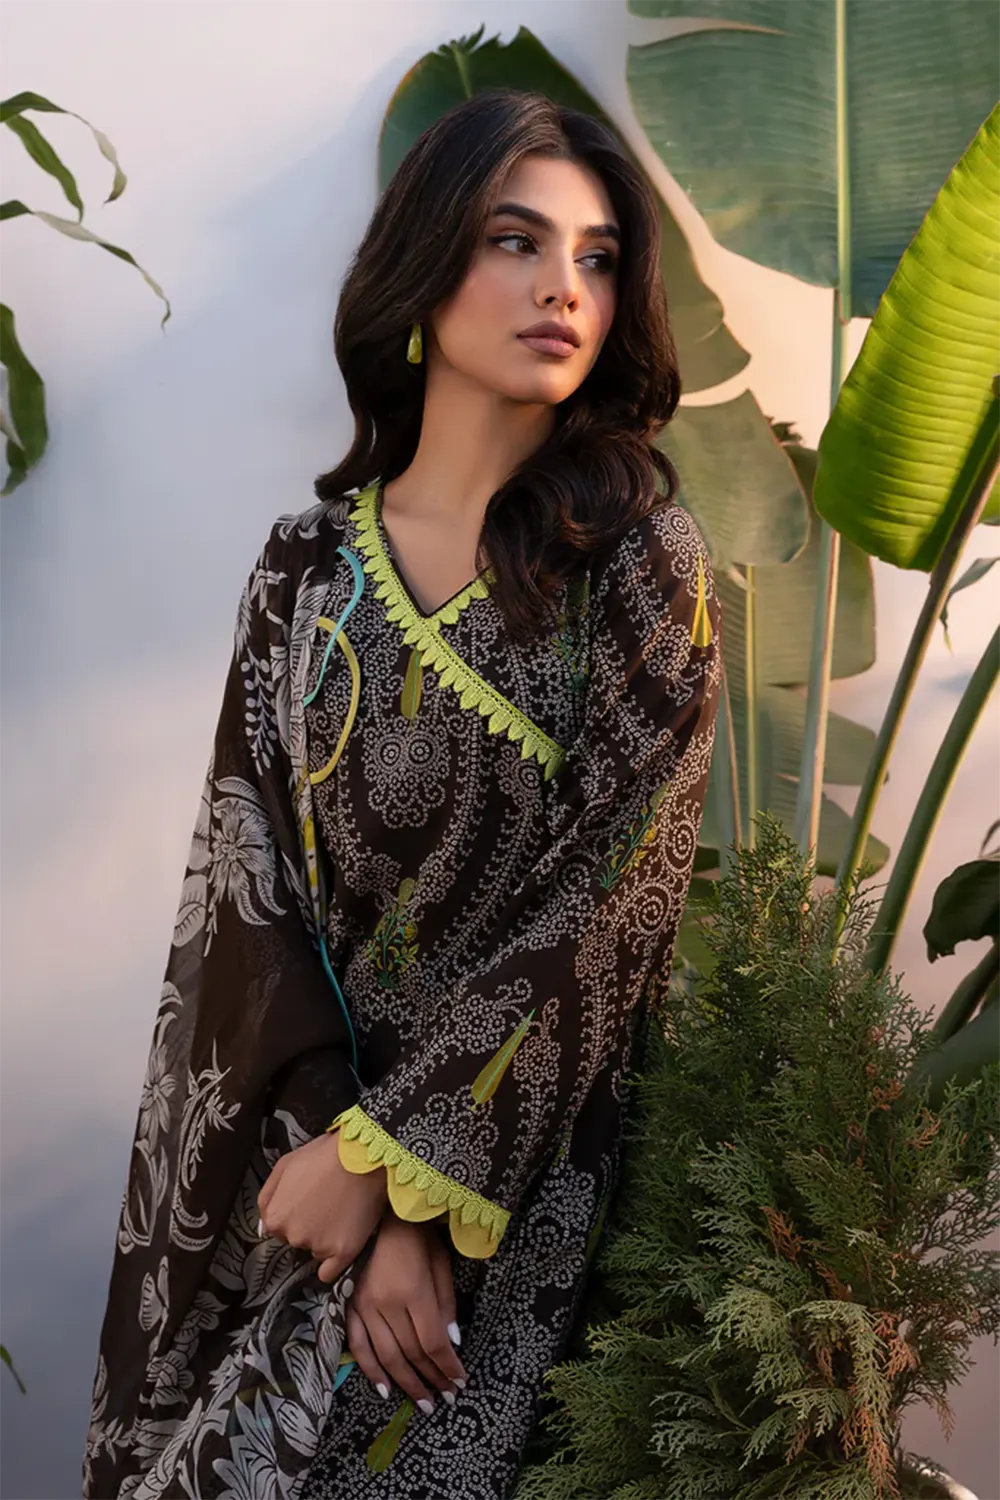 3-PC Unstitched Printed Lawn Shirt with Chiffon Dupatta and Trouser CP4-28 by Chrizma